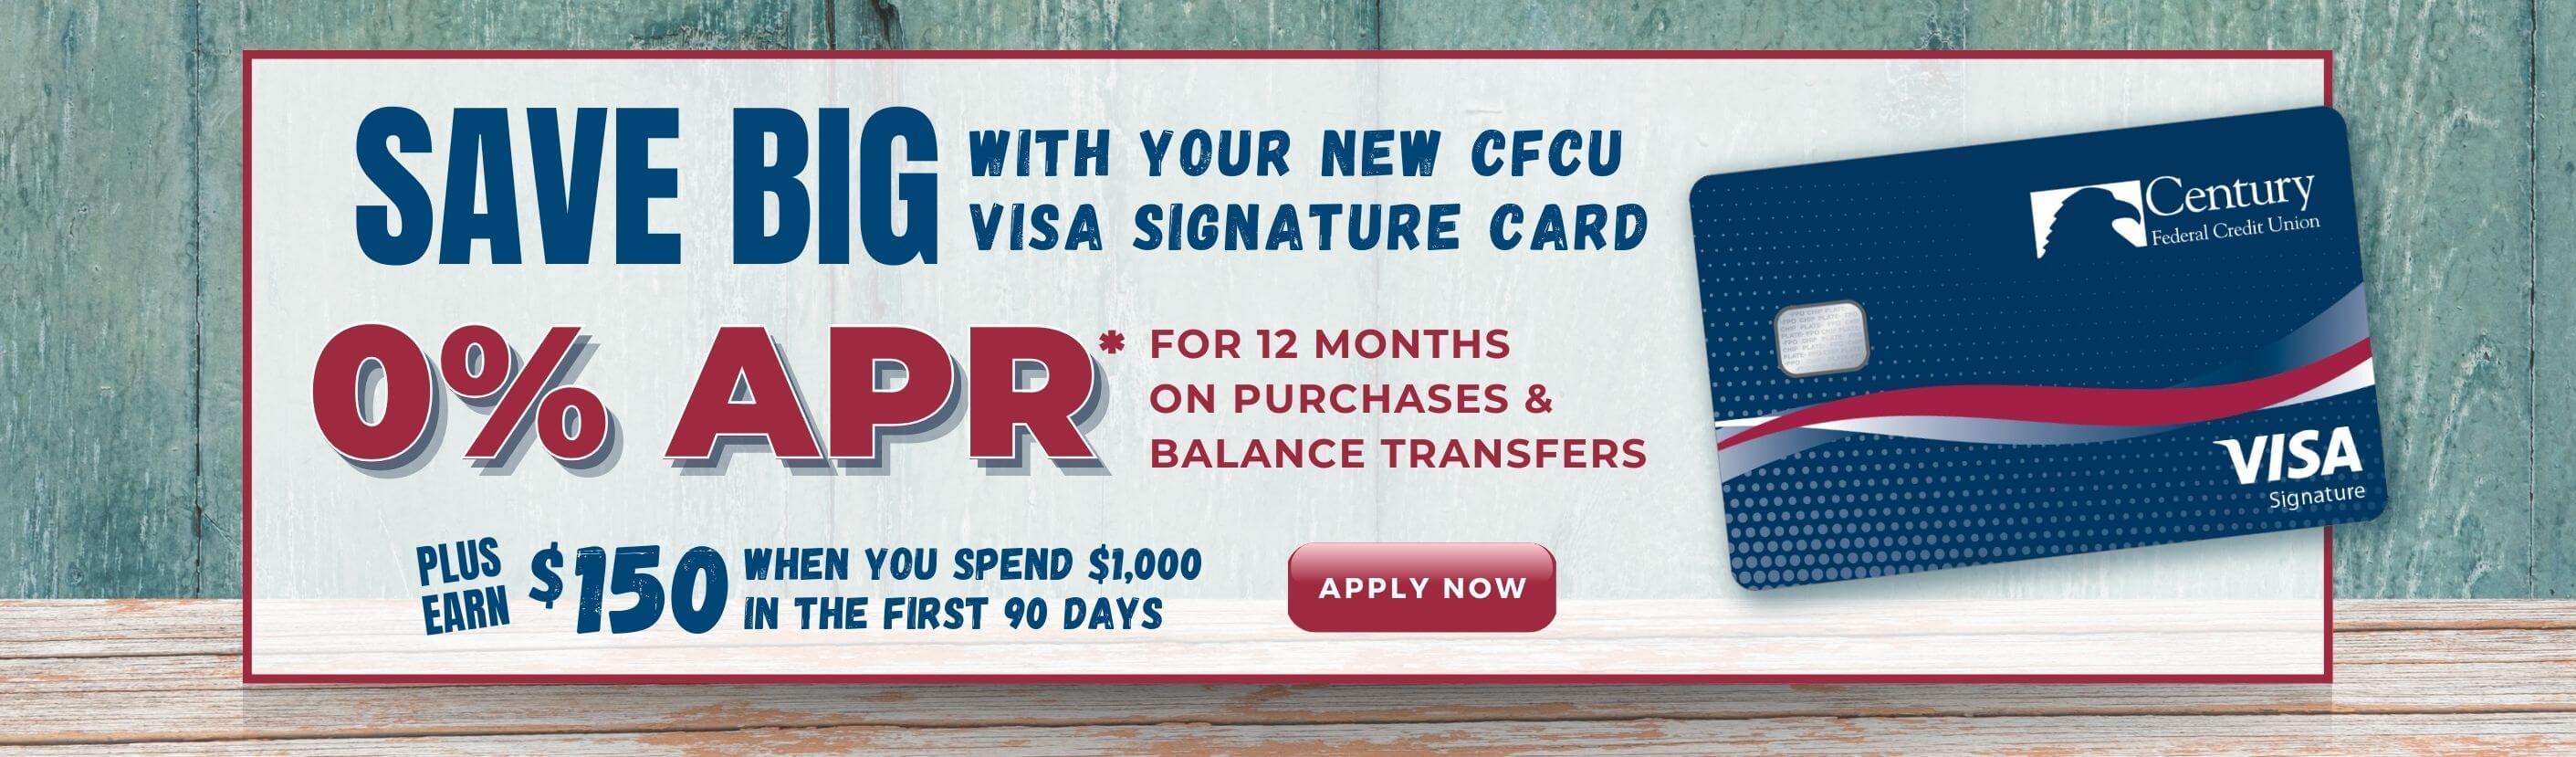 Save big with your new CFCU visa signature card. 0% APR* for 12 months on purchases & balance transfers. Plus earn $150 when you spend $1,000 in the first 90 days. Learn More